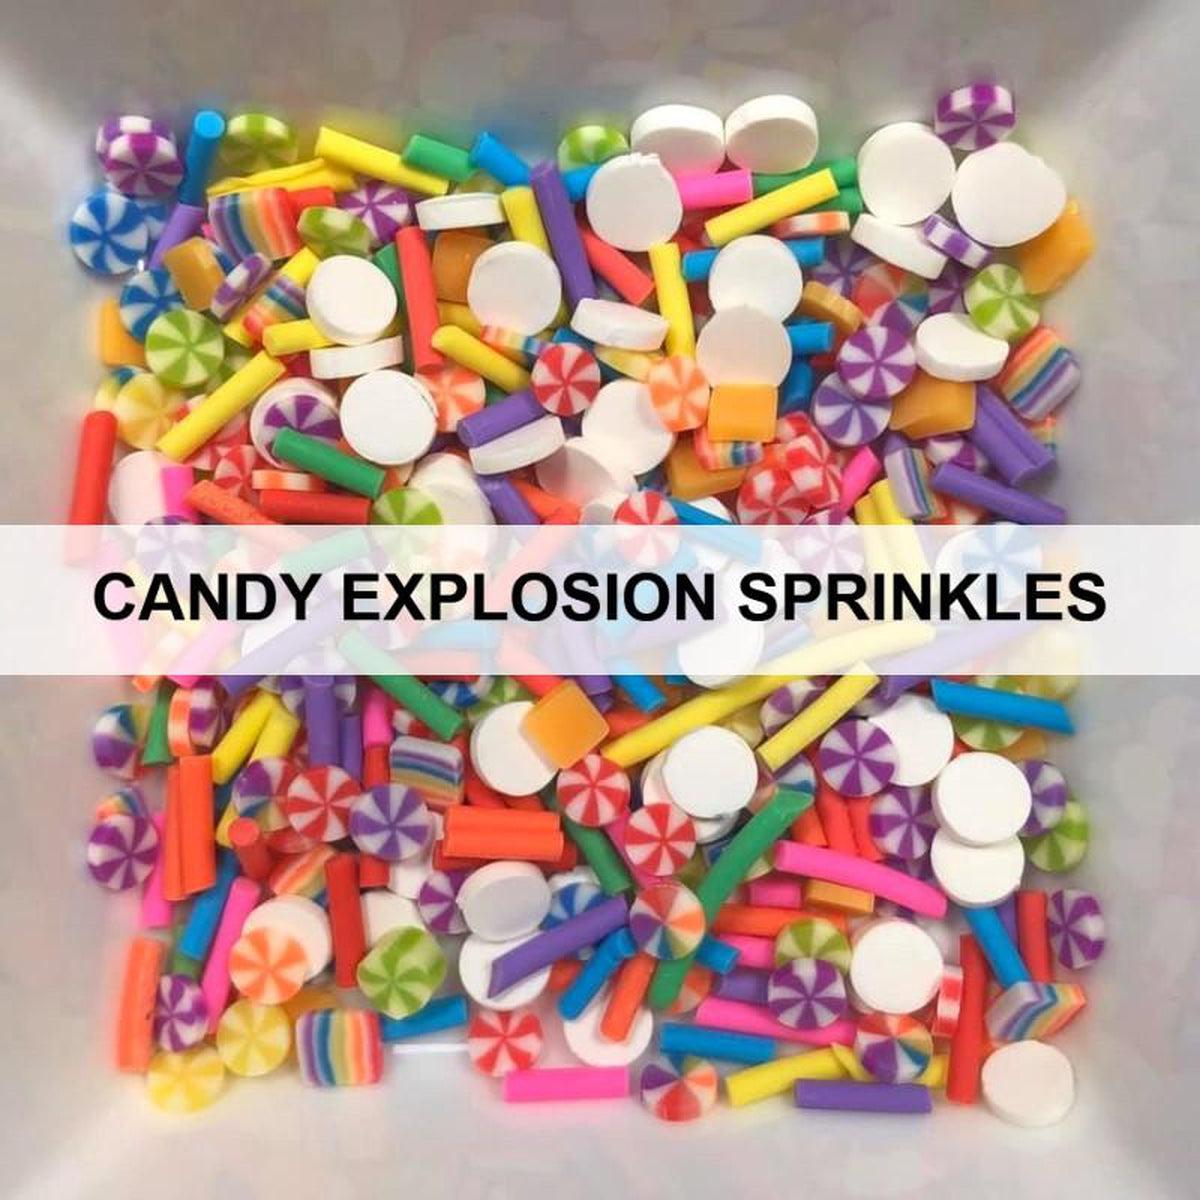 Candy Explosion Sprinkles by Kat Scrappiness - Kat Scrappiness